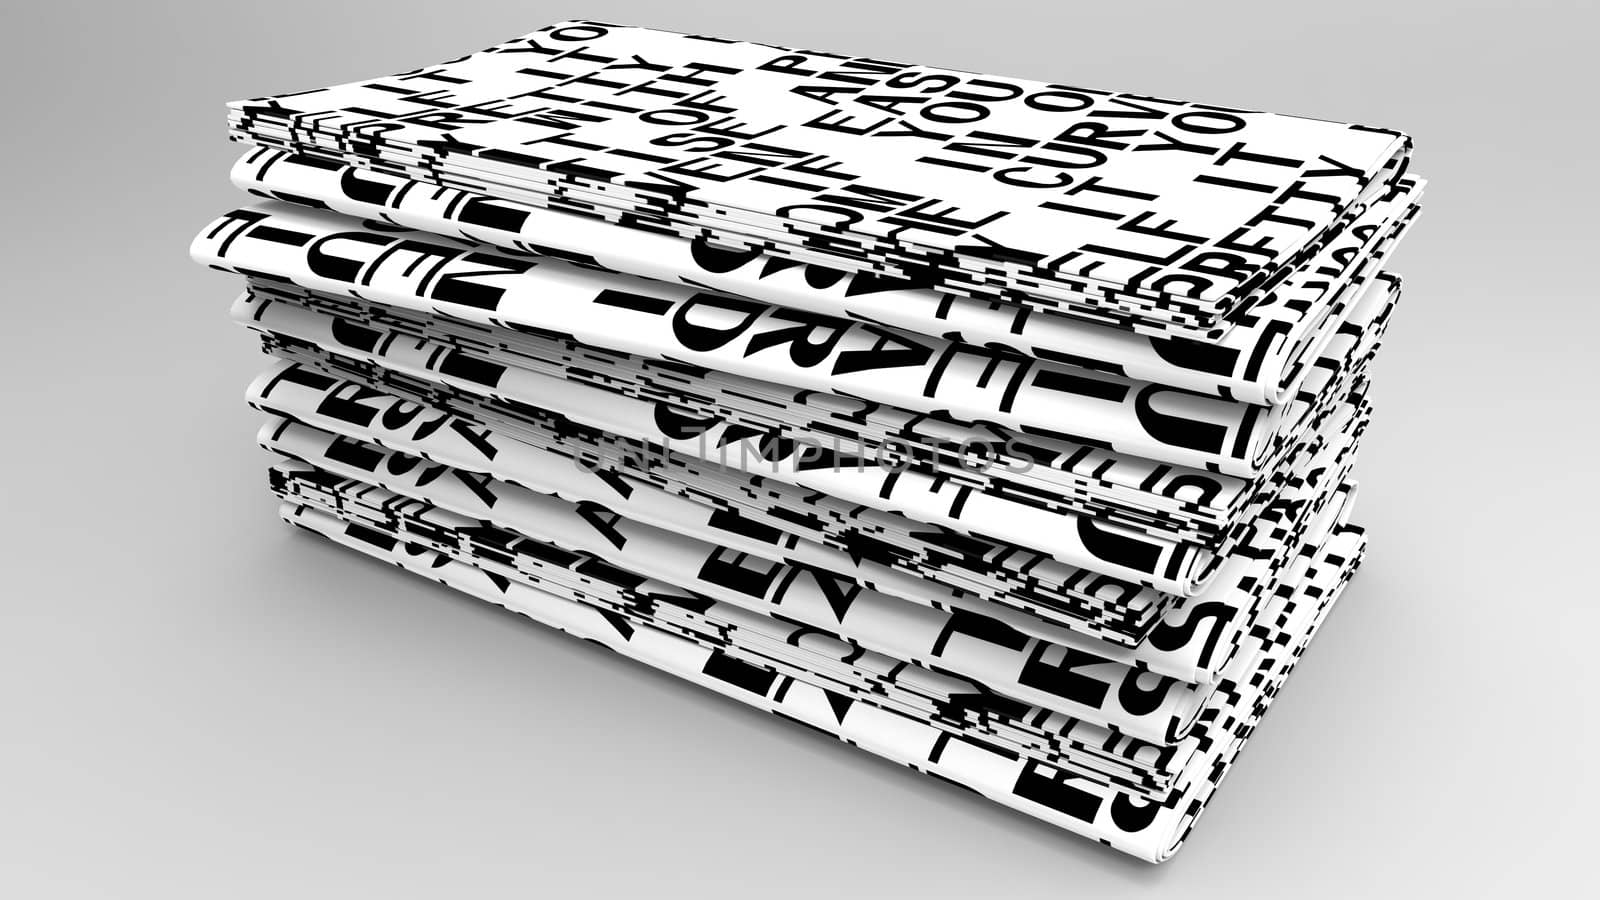 Newspapers by andromeda13